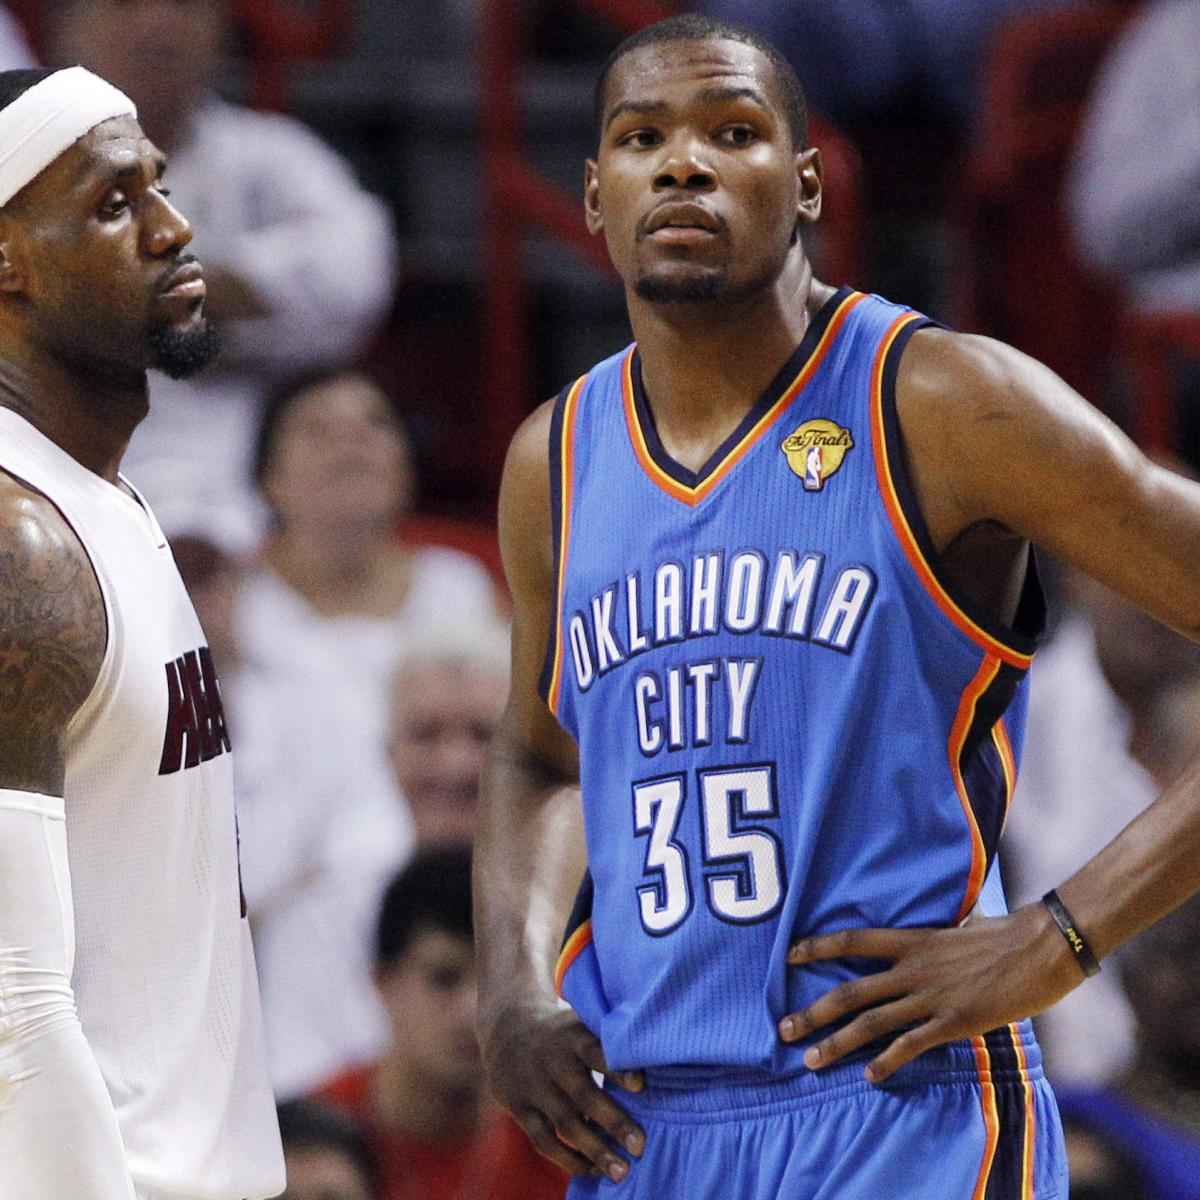 The MVP award grows Kevin Durant's brand and the spotlight on OKC